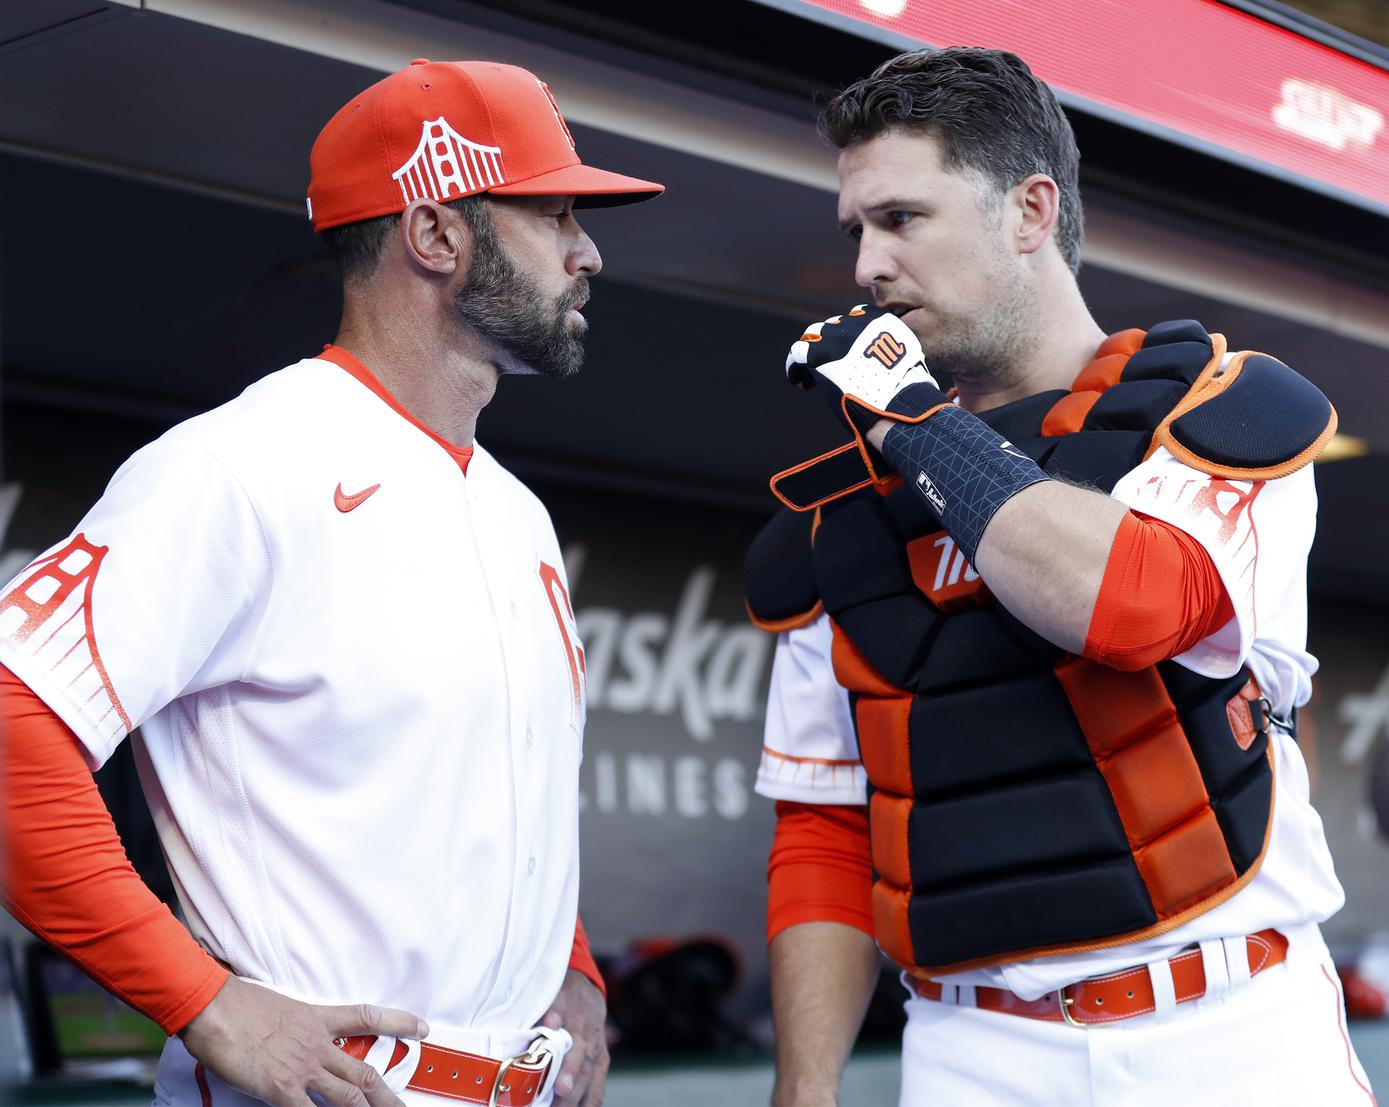 Giants' Kapler says Posey still 'dealing with personal decision